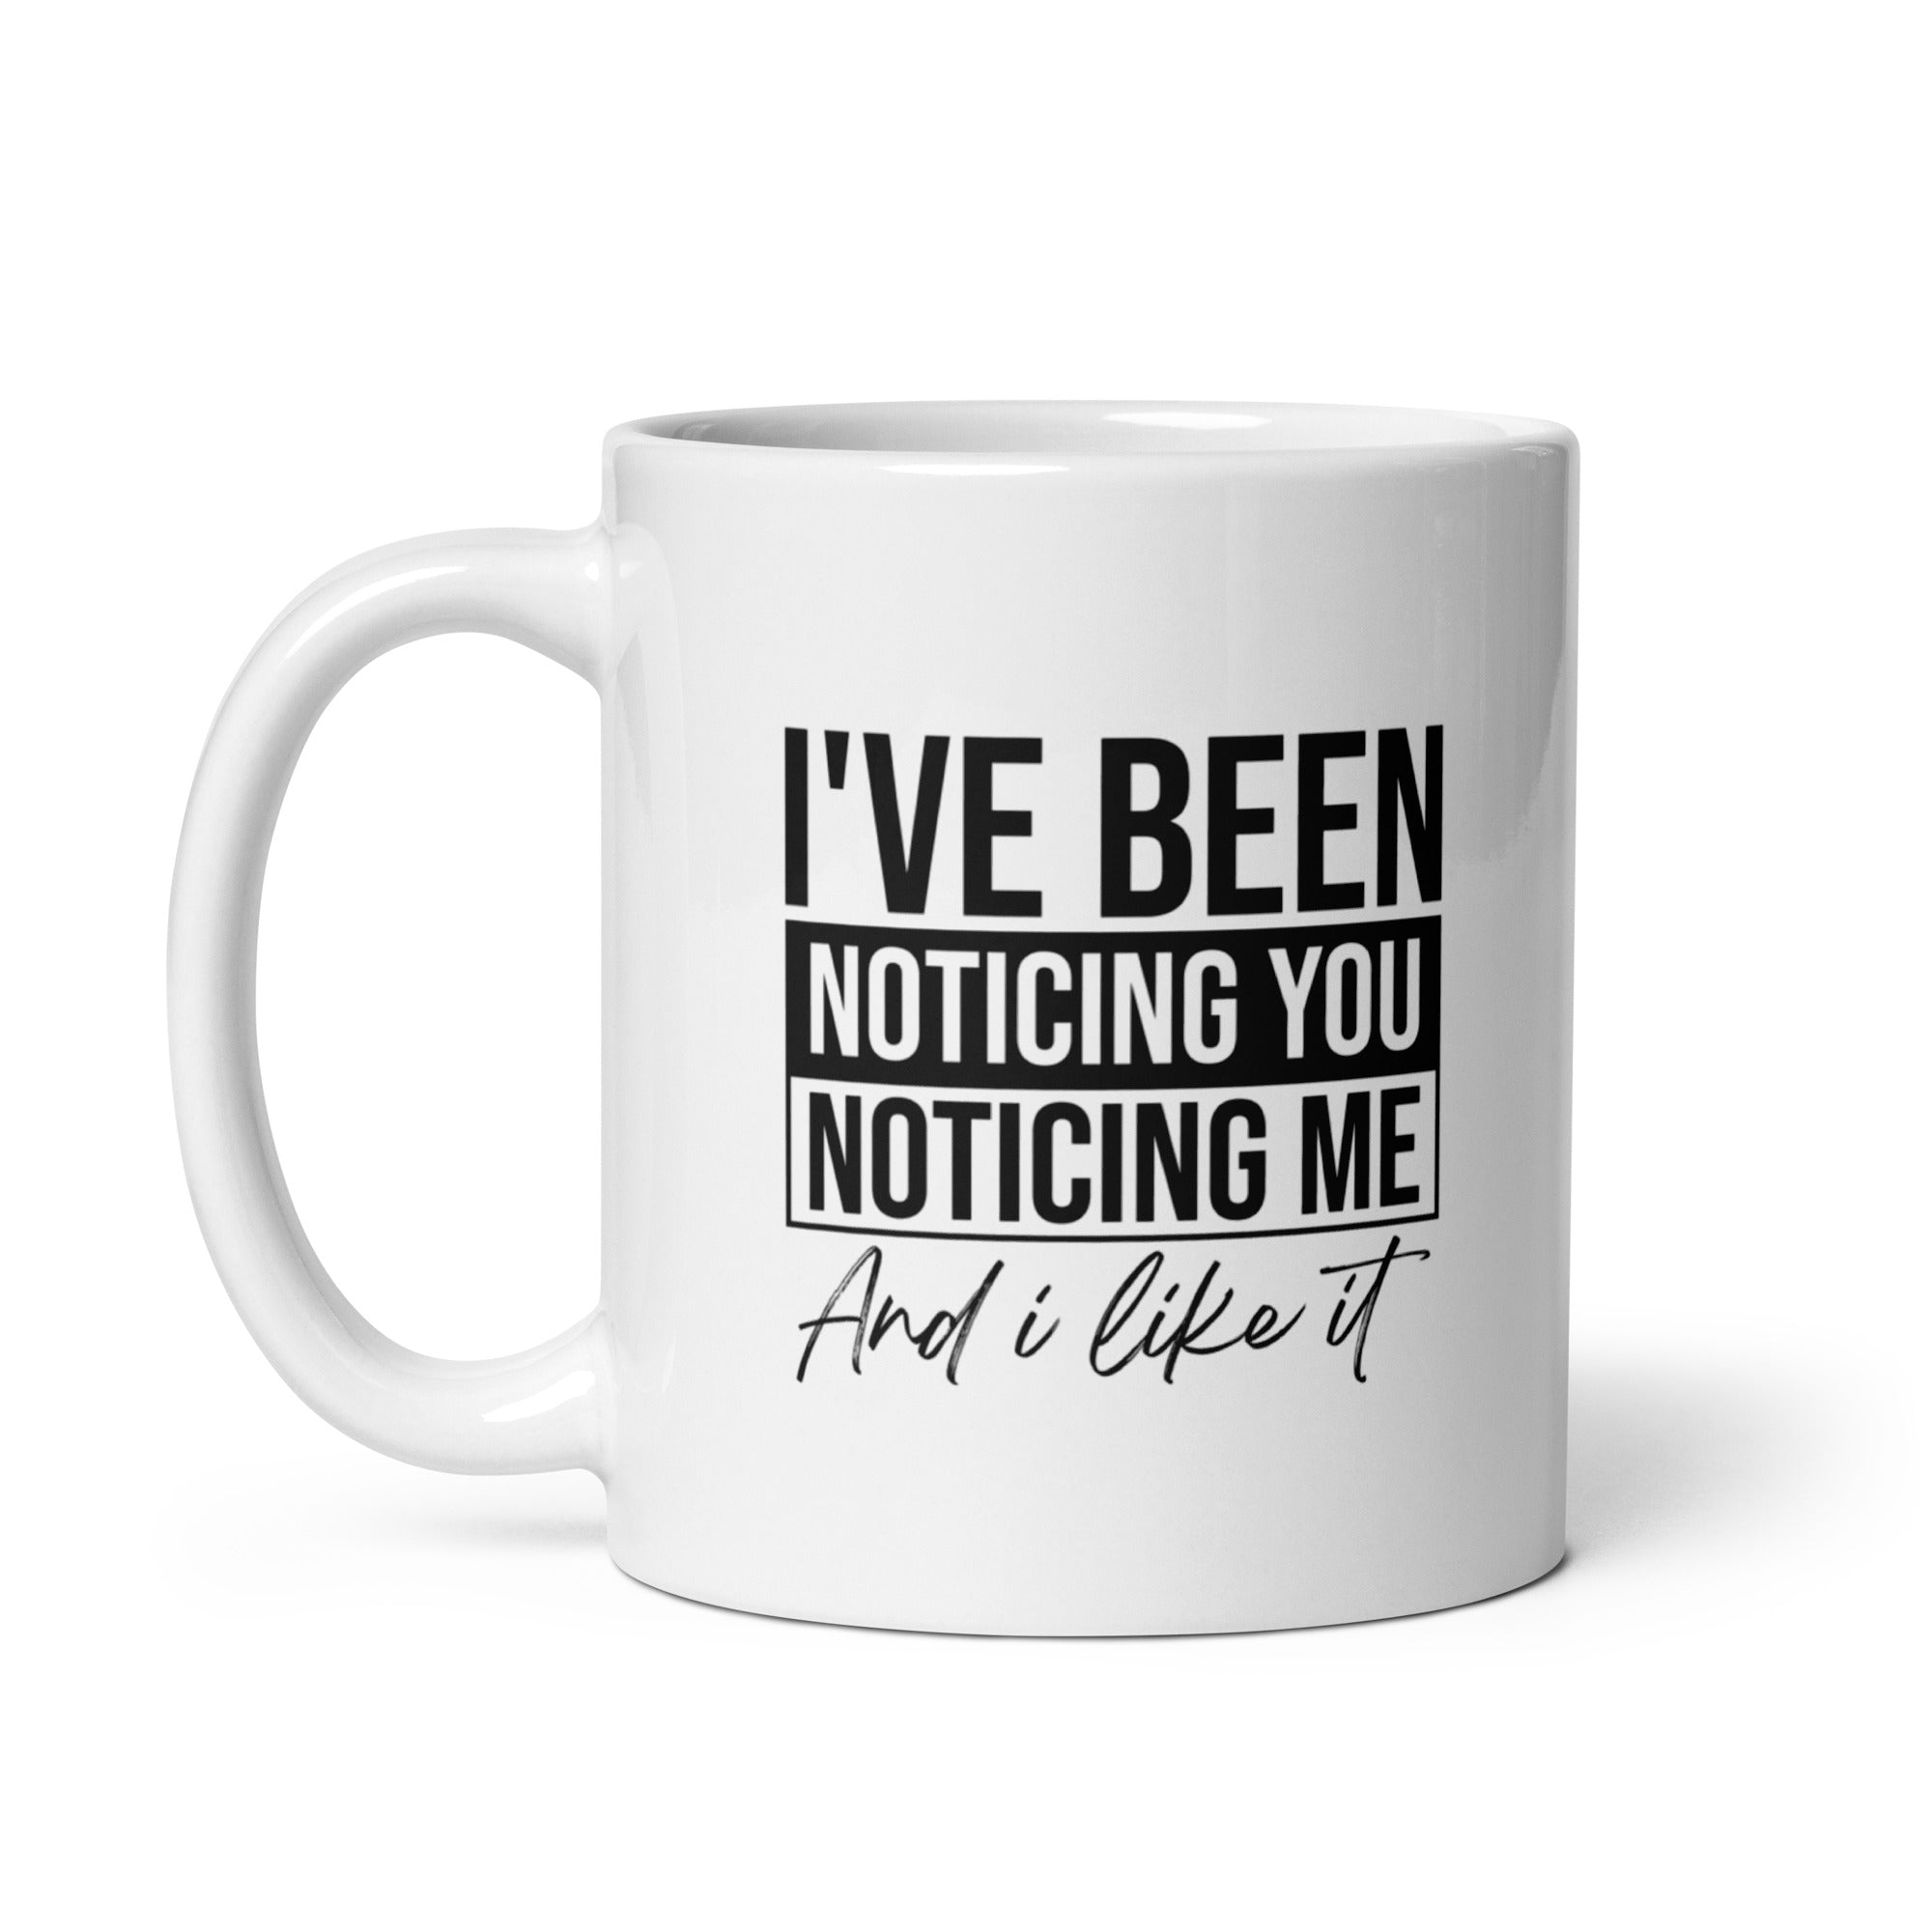 White glossy mug | I've been noticing you noticing me and I like it